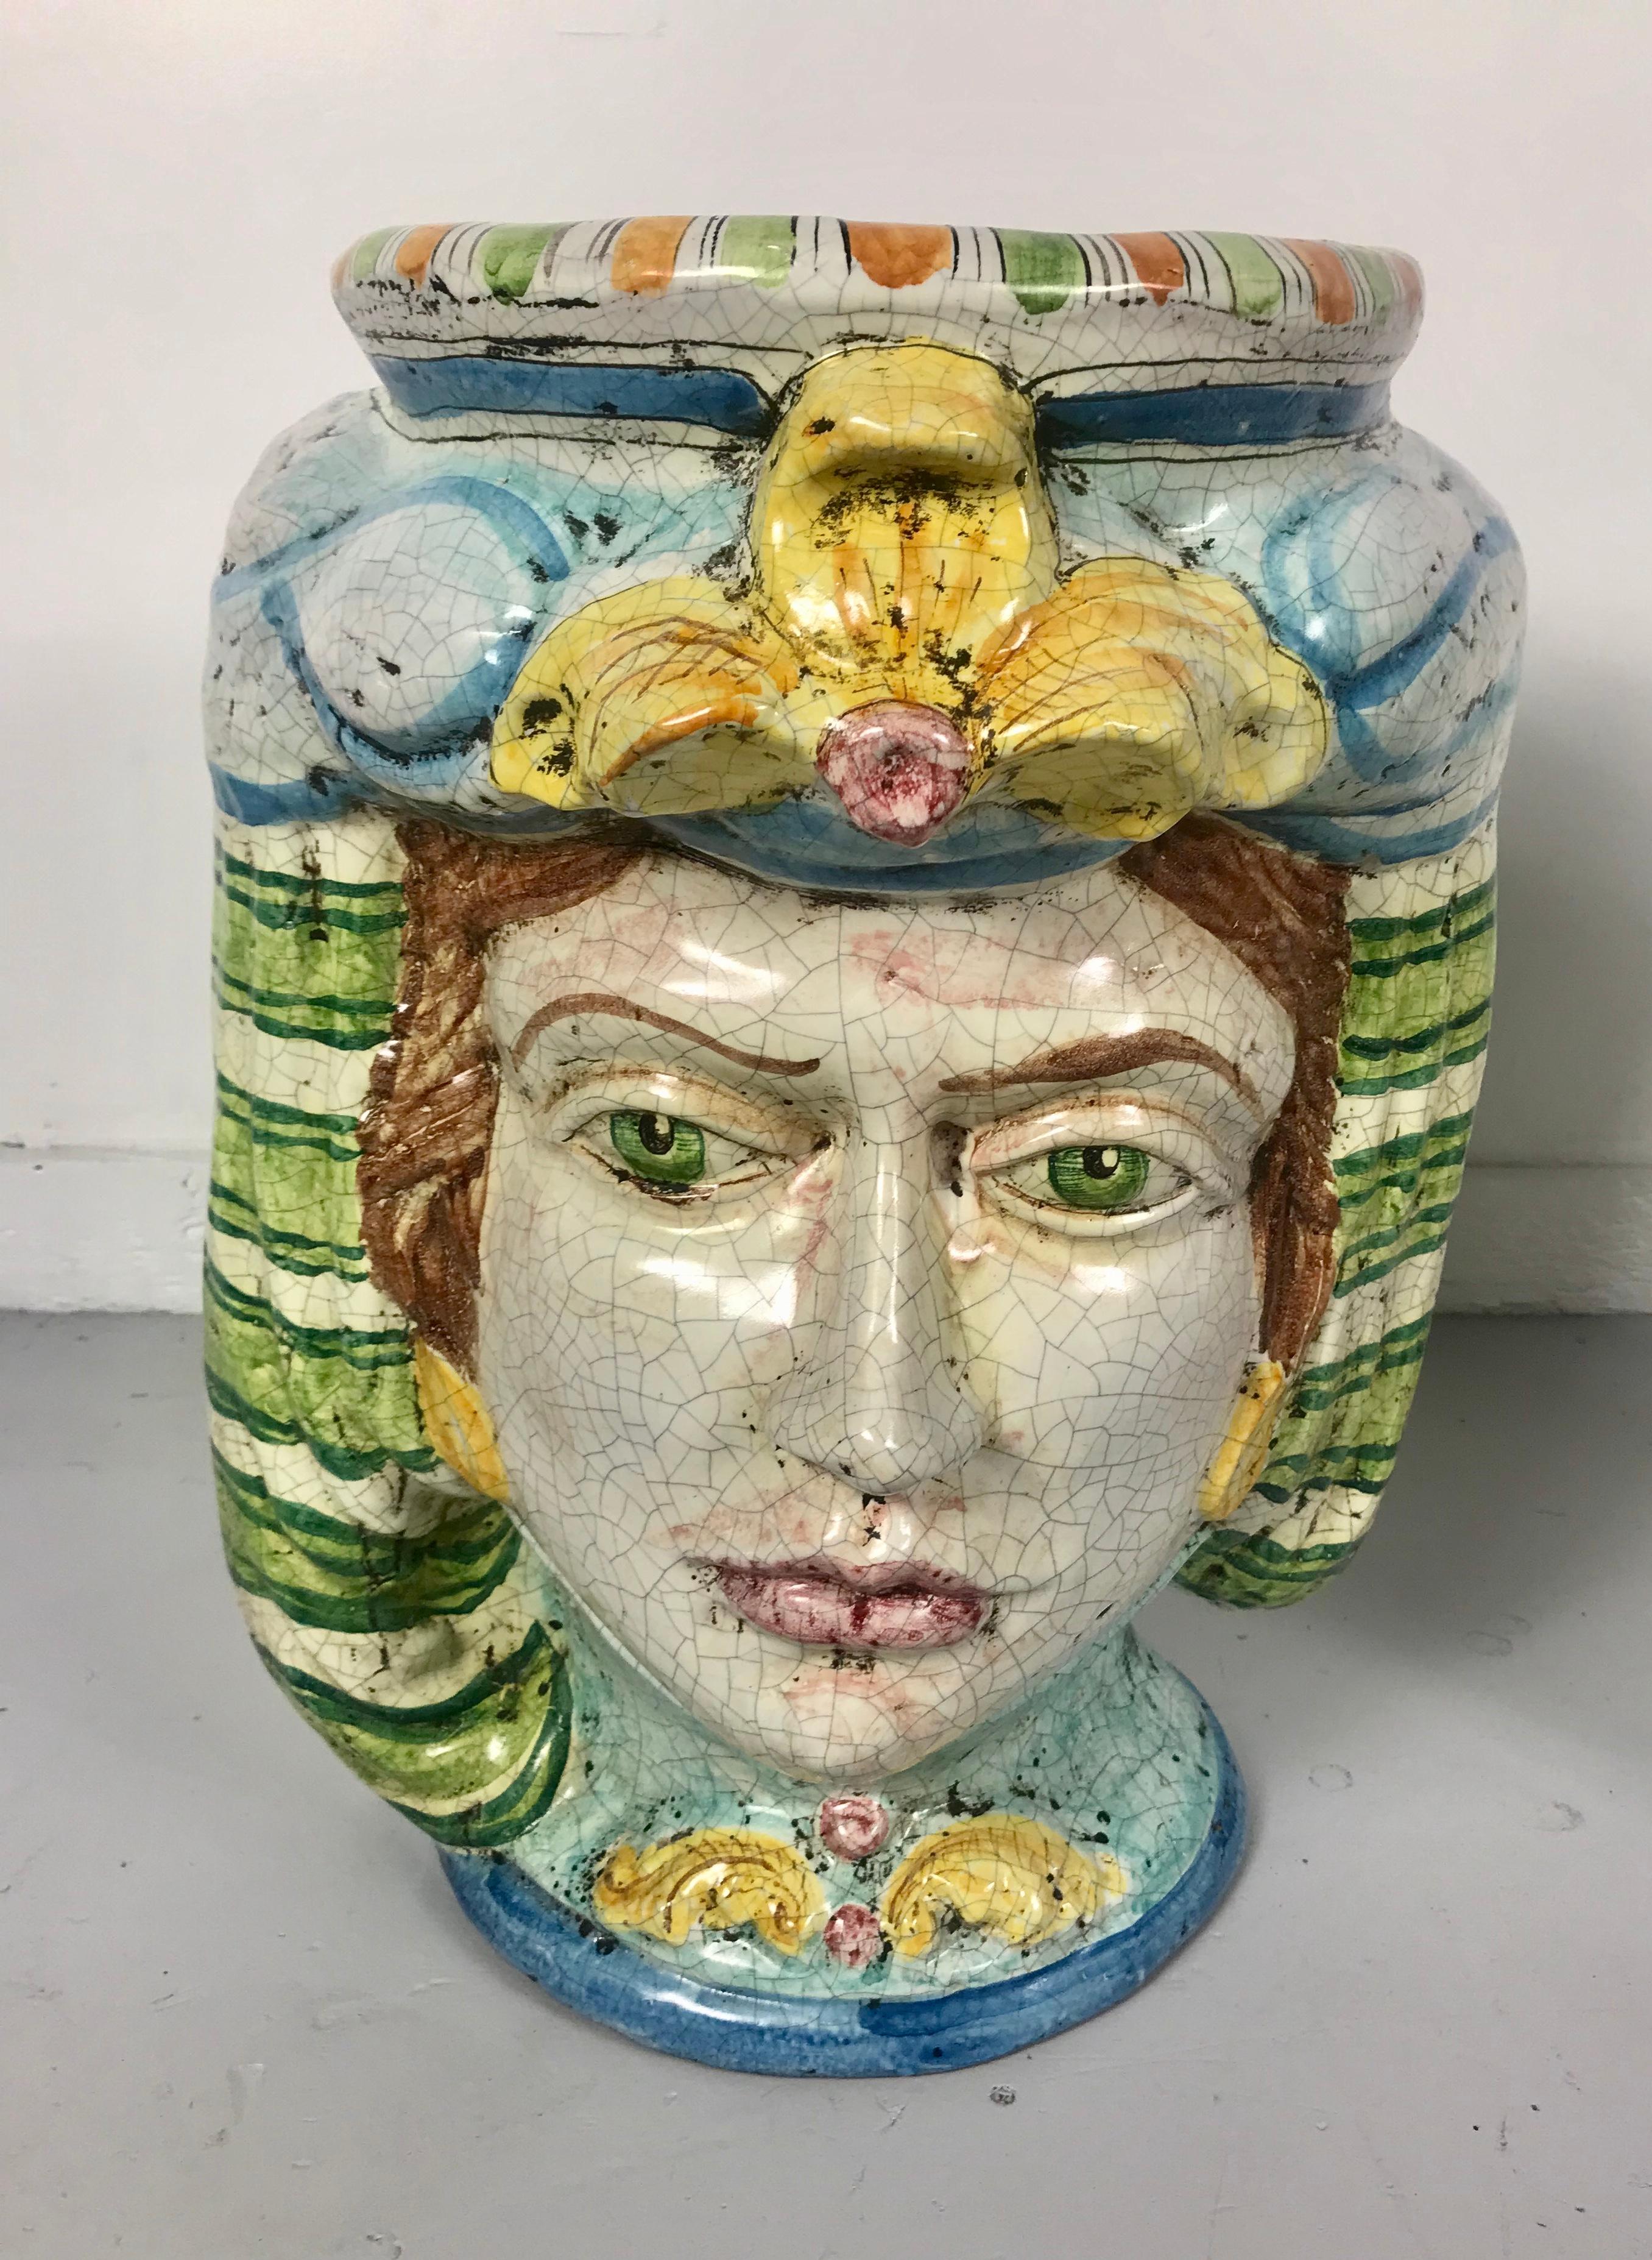 Monumental pair of Sicilian Majolica, faience figural busts, planter / jardinière’s, amazing quality, color, glaze, imported from Italy most likely in the late 1950s, early 1960s, attributed to Caltagirone, Caltagirone citta dell ceramica,.